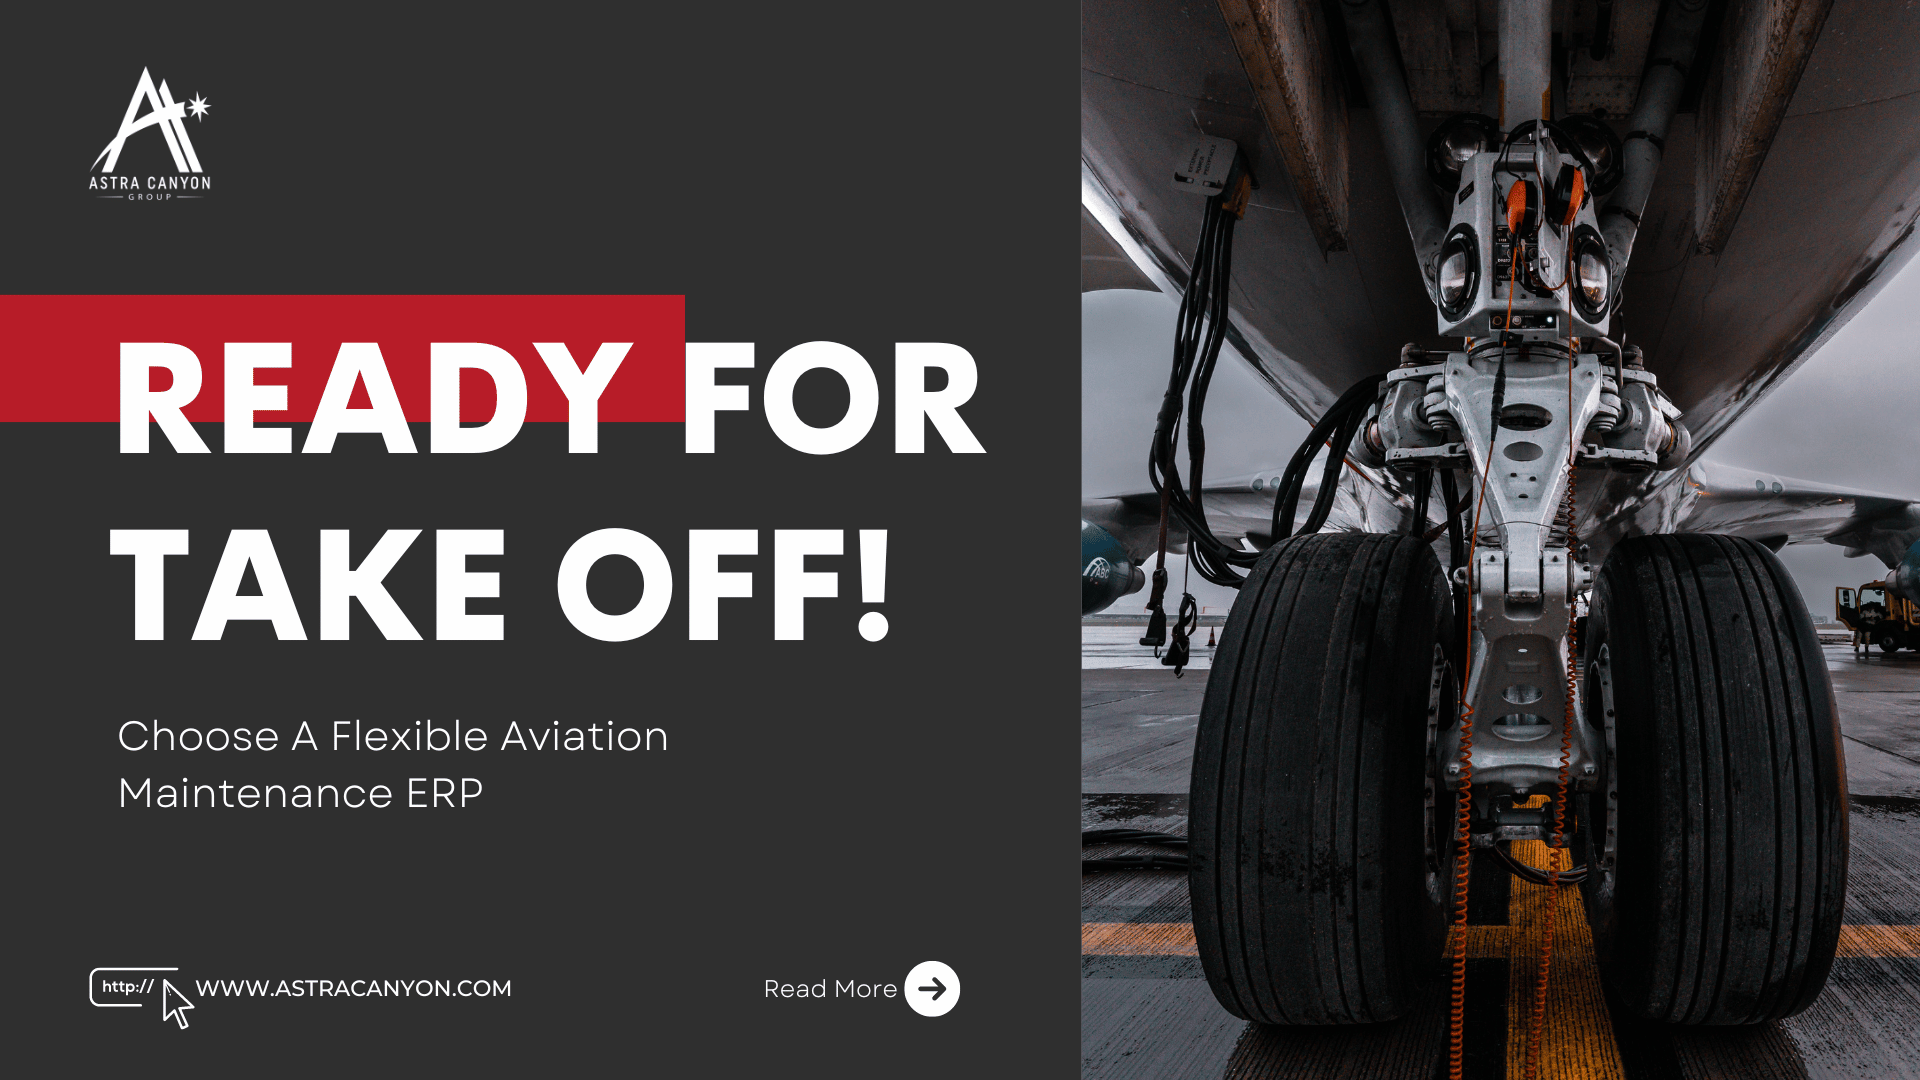 Aerospace ERP Buyers Guide: Choose an Aviation Maintenance ERP flexible enough to handle today’s challenges